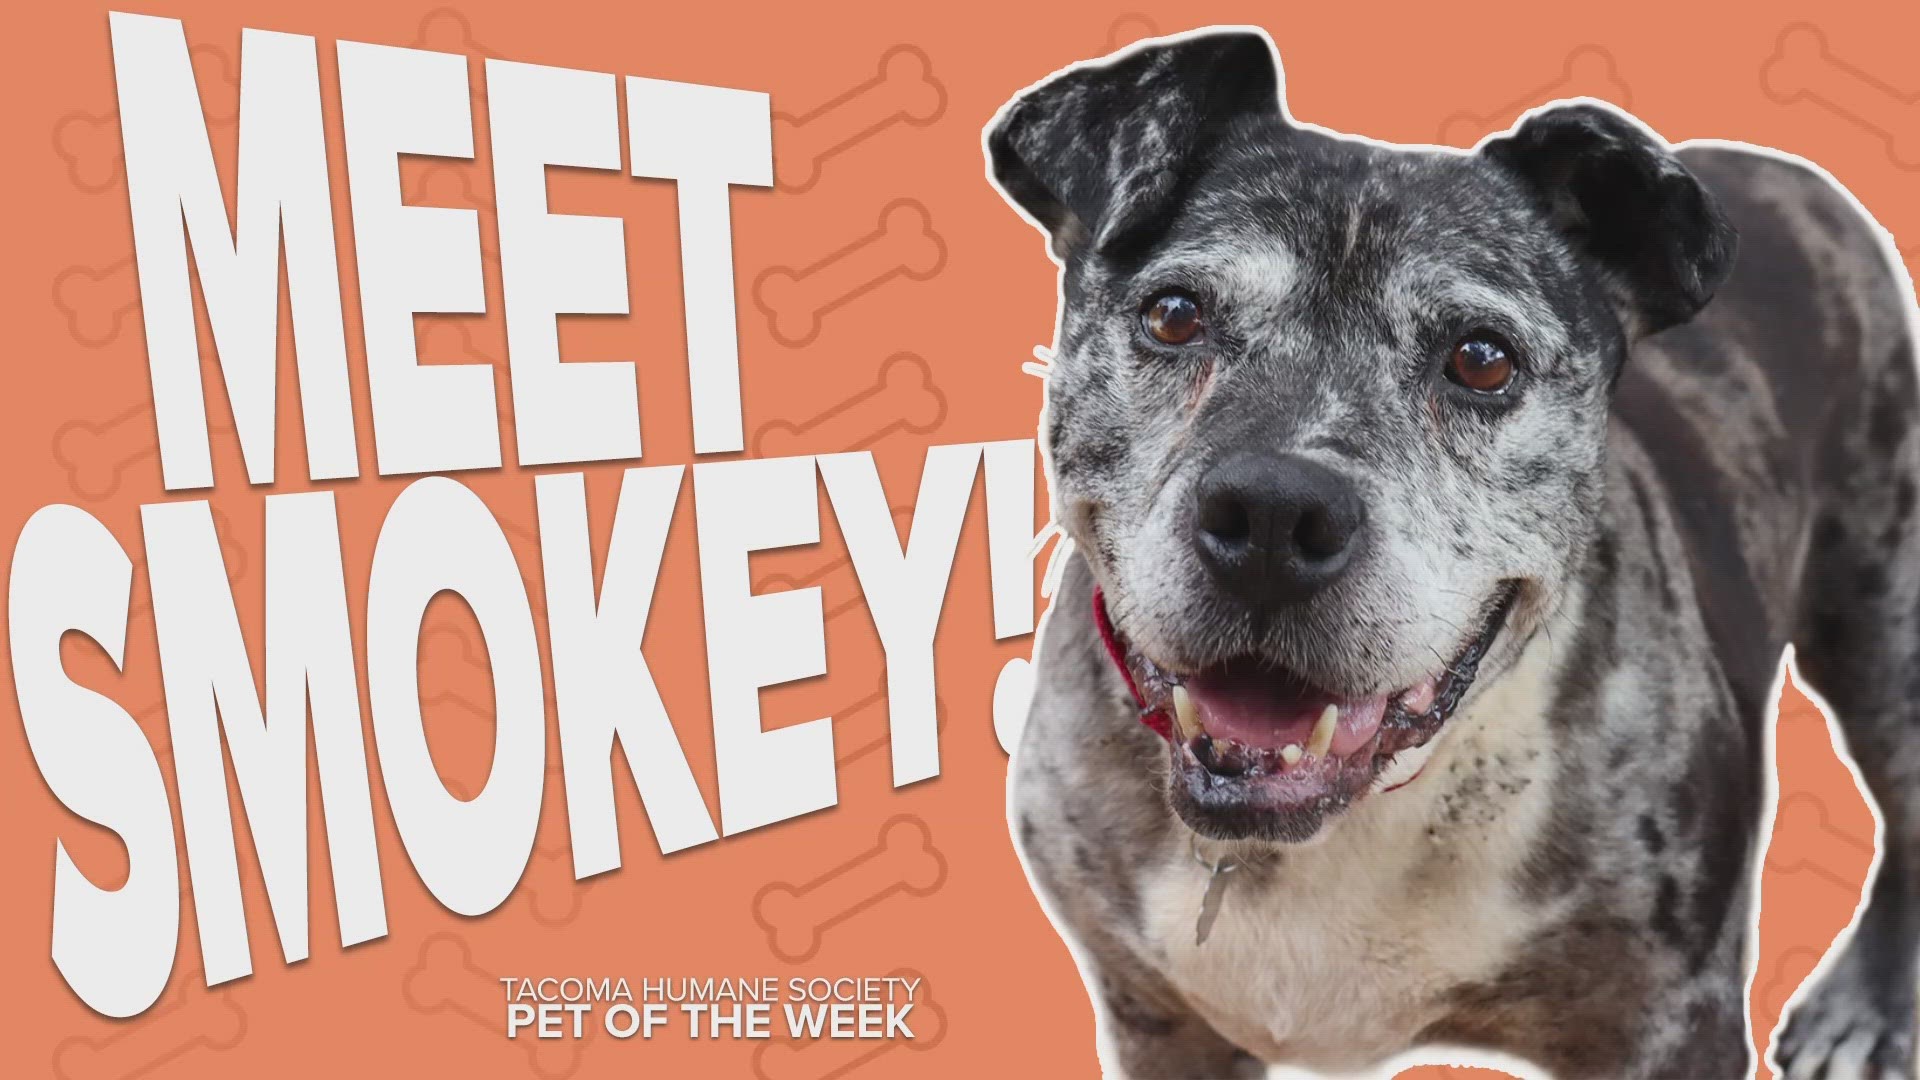 This week's featured adoptable pet is Smokey!